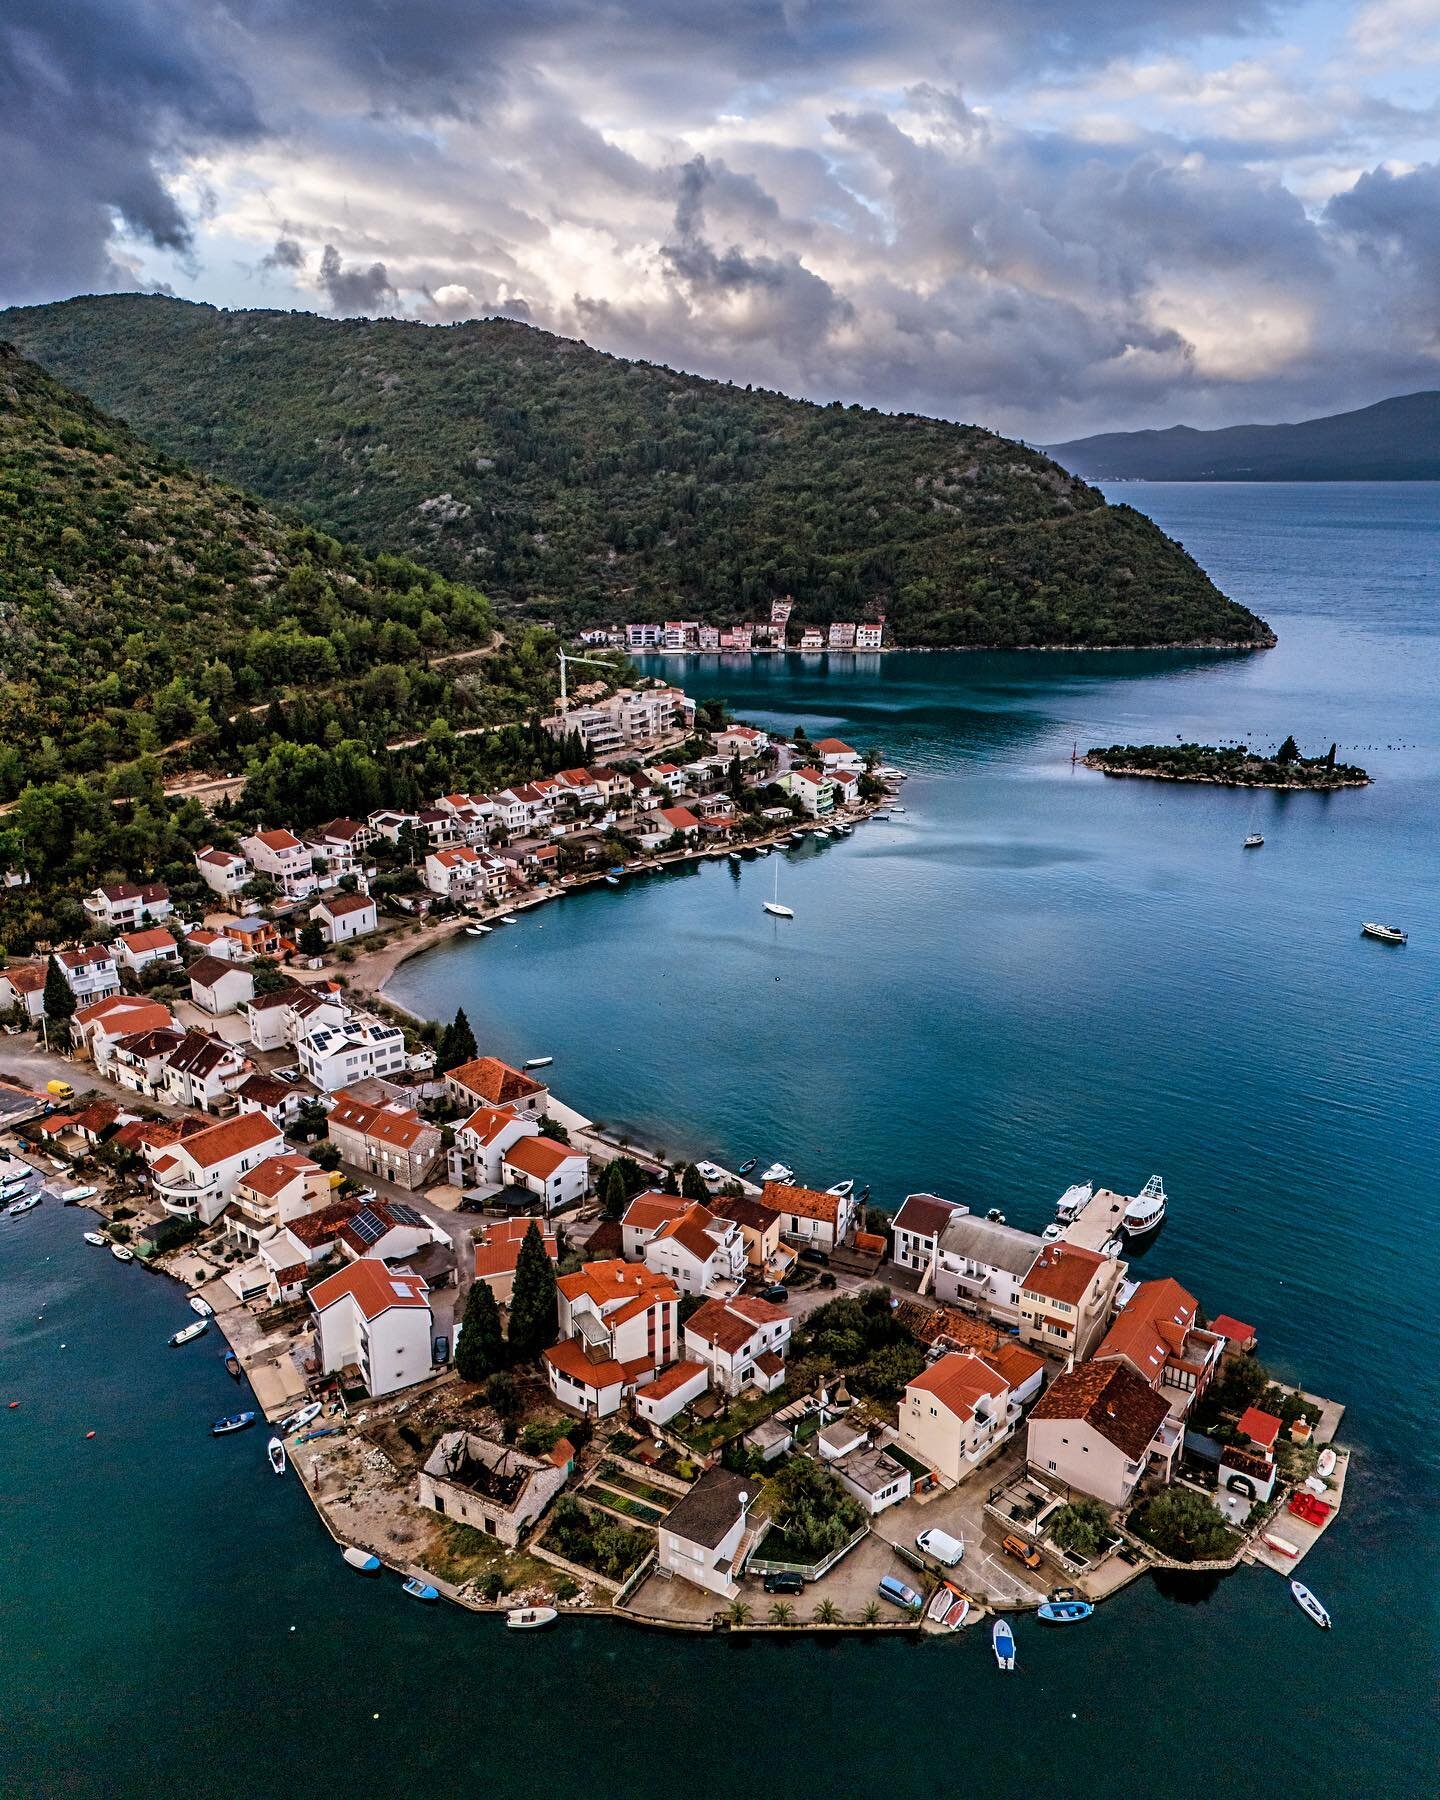 Morning view from above. #dji #croatia #travel #drone